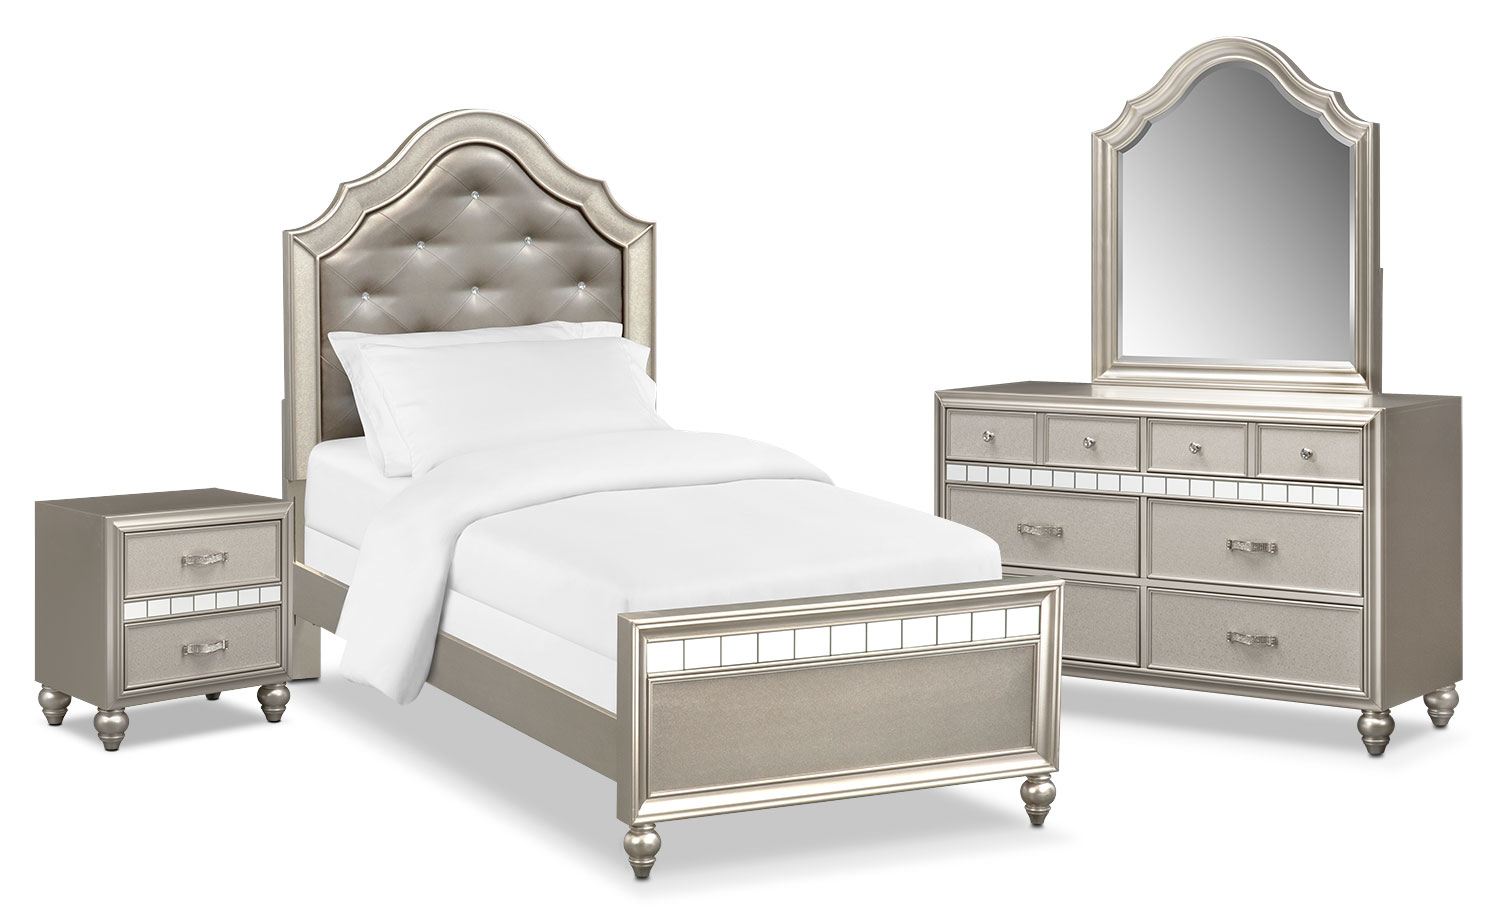 Serena Youth 6 Piece Bedroom Set With Nightstand Dresser And Mirror in sizing 1500 X 921